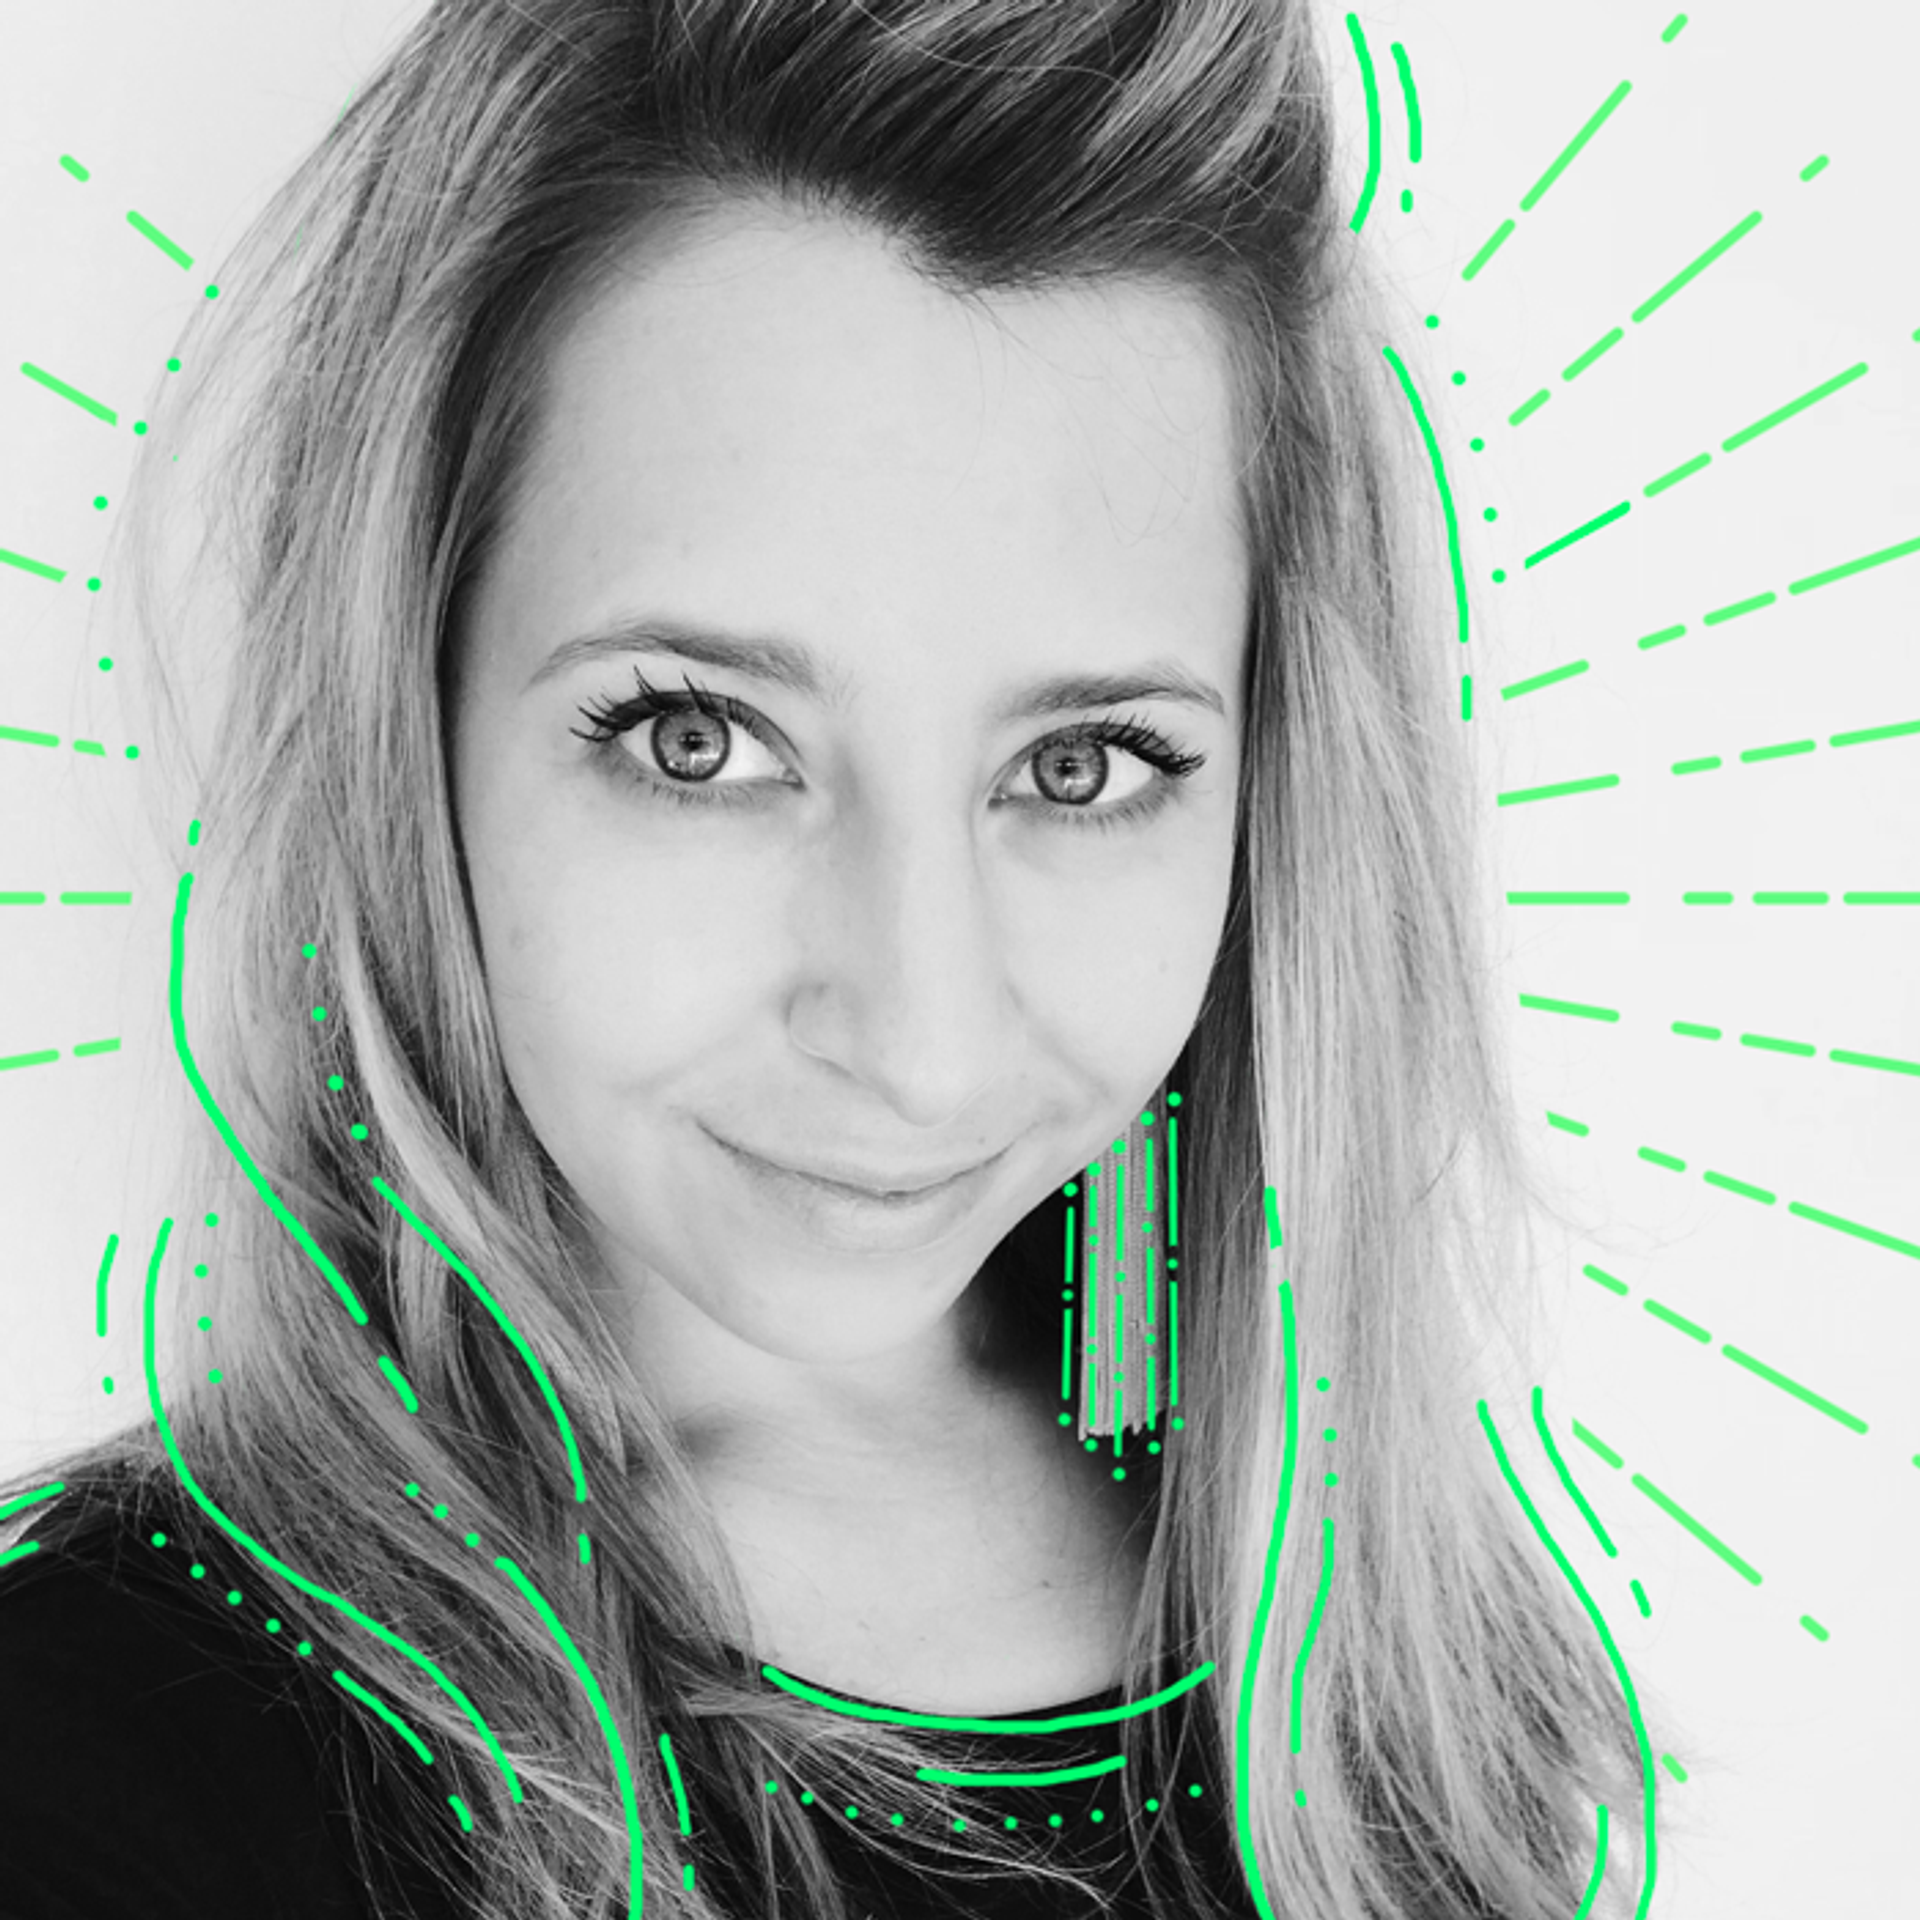 Anneke helps manage our 200+ creatives from her teeny tiny town in South Africa. She loves making things and is forever on a quest to create smart and beautiful work across all platforms and mediums.  She has over 100 local and international awards, including Cannes, D&AD, One Show. 